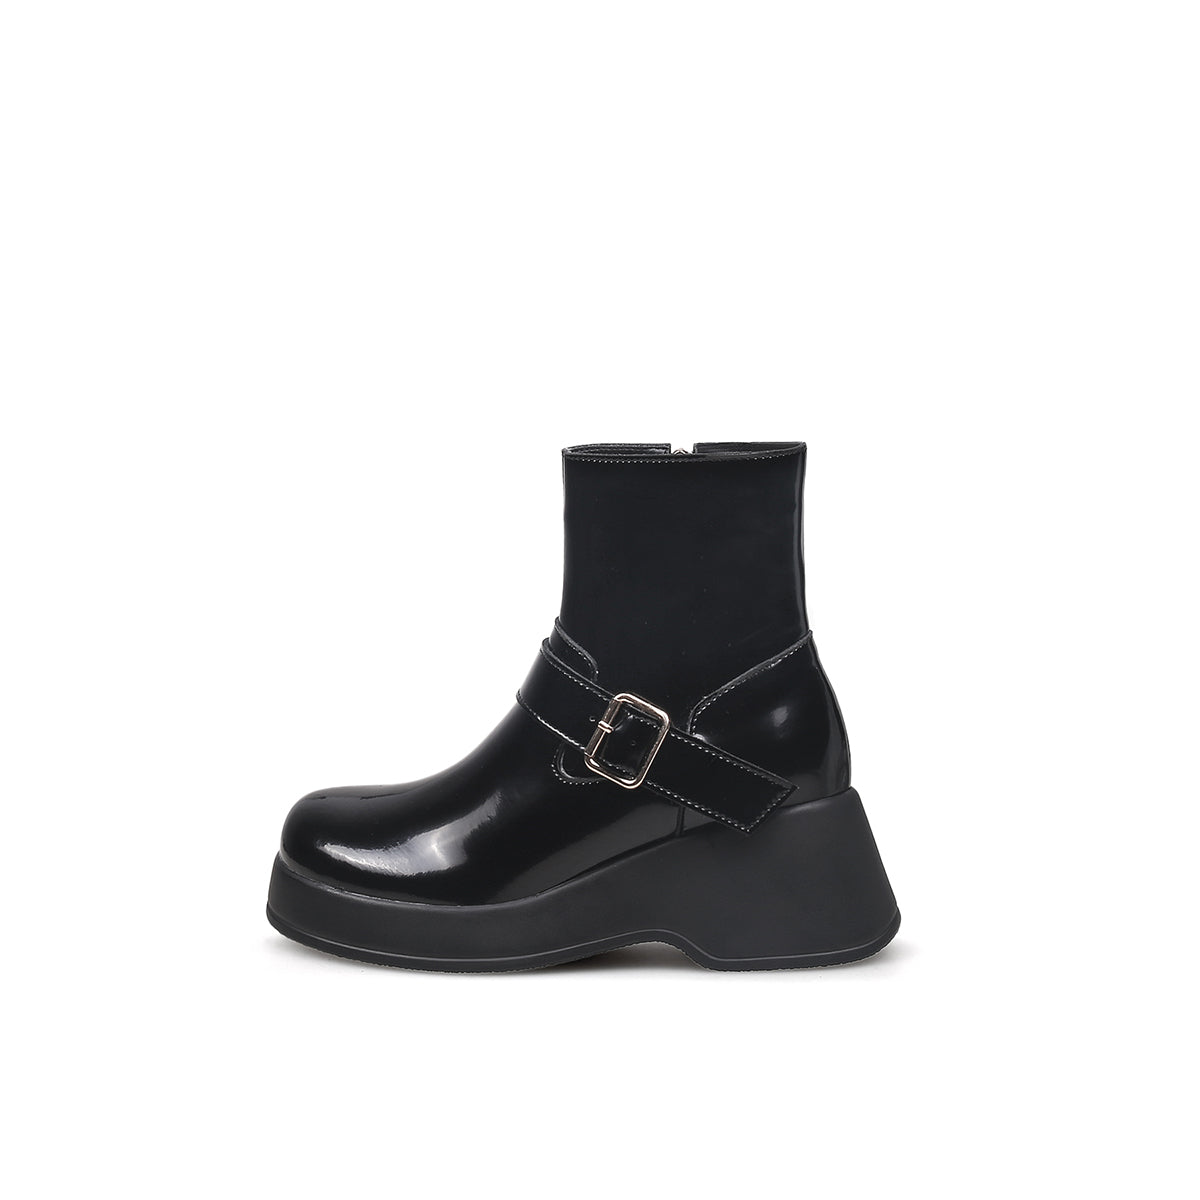 Buckled Walllie Patent Black Boots